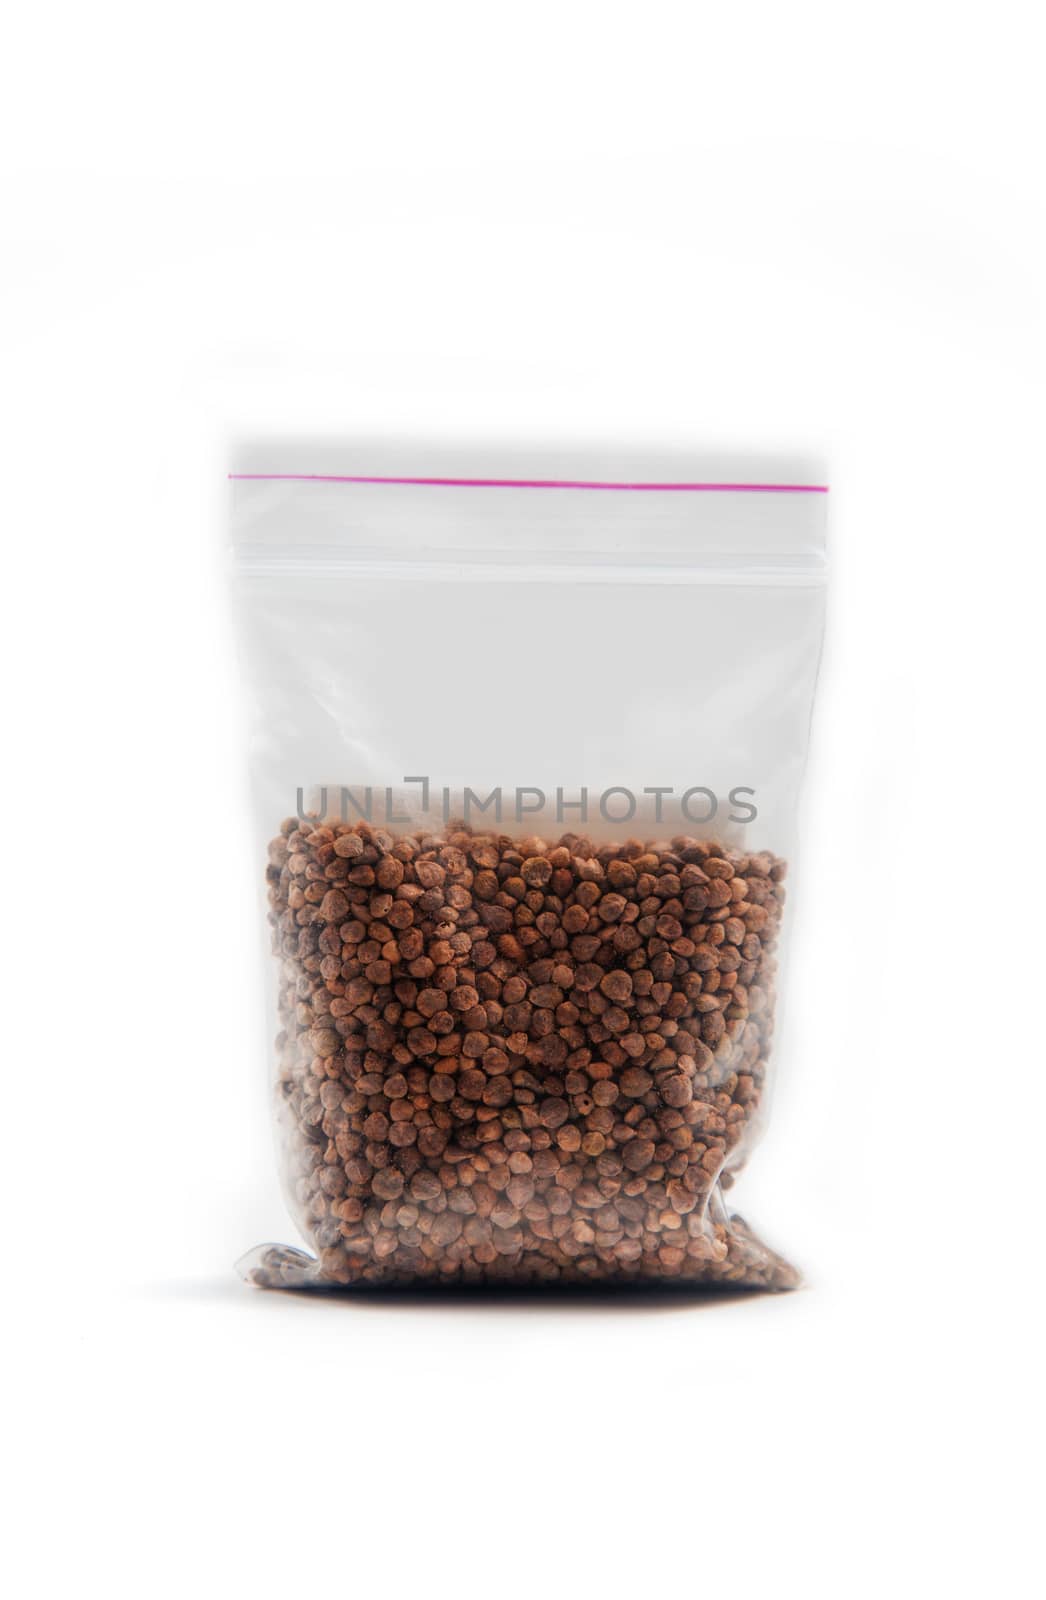 Chinese radish seeds in a package for germination on a white background.